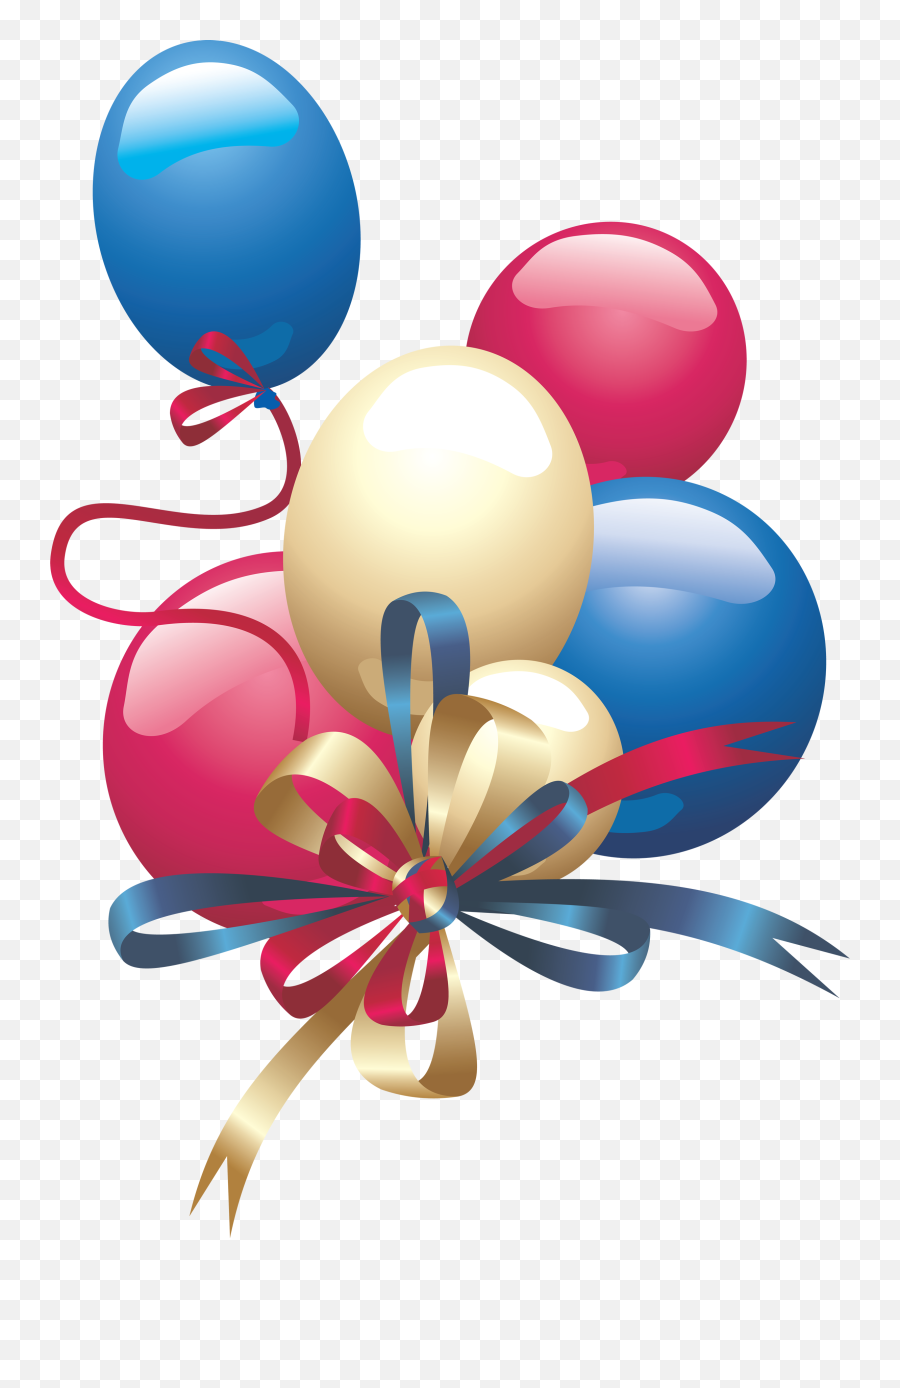 Balloons Png With Ribbon Knotted Images Download - Birthday Balloon Png Hd,Ribbons Png